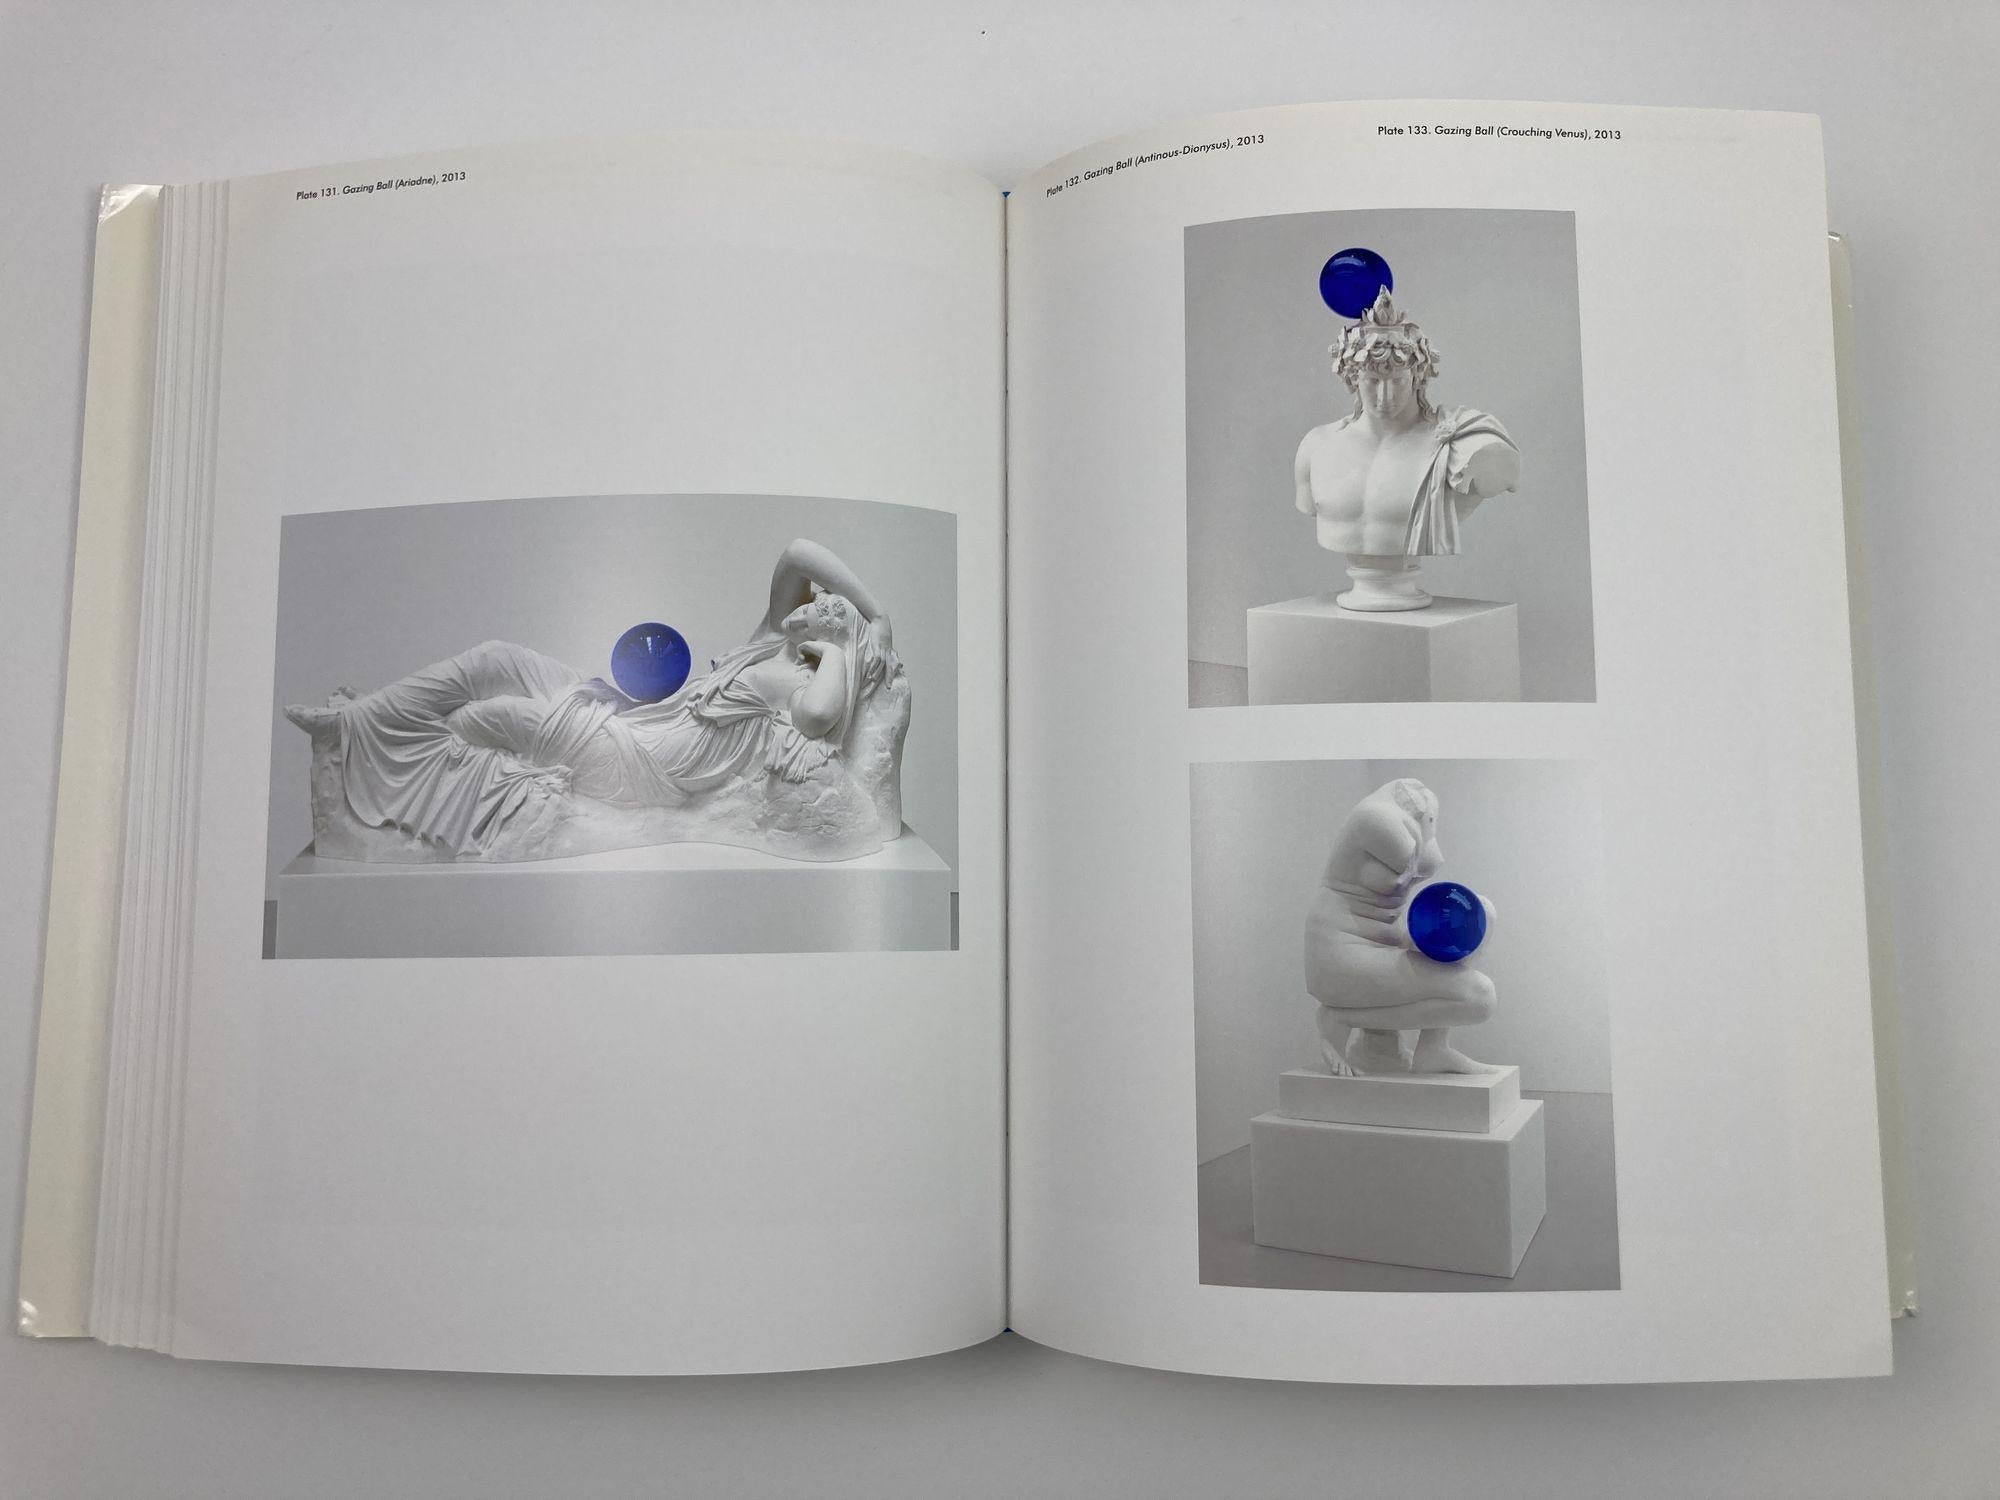 Paper Jeff Koons : A Retrospective by Scott ROTHKOPF Hardcover Coffee Table Book For Sale